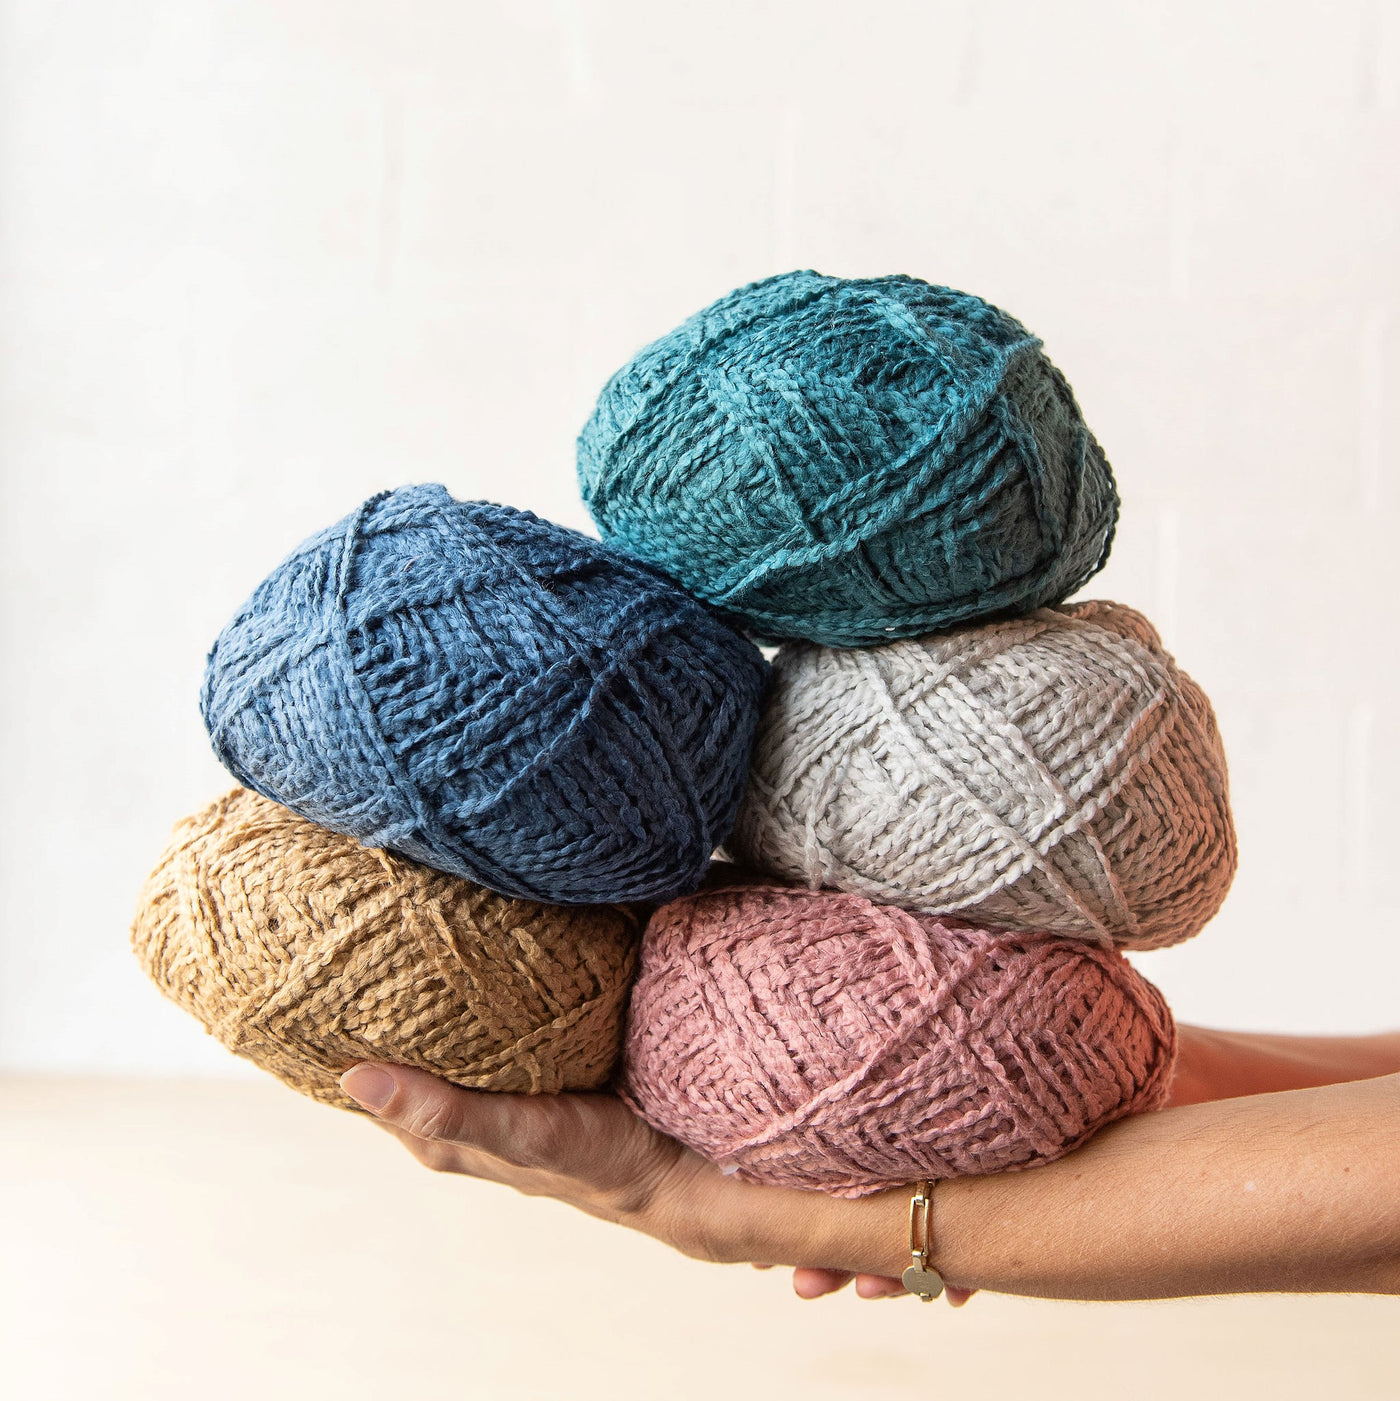 Ganxxet cotton candy for knitters, crocheters and weavers